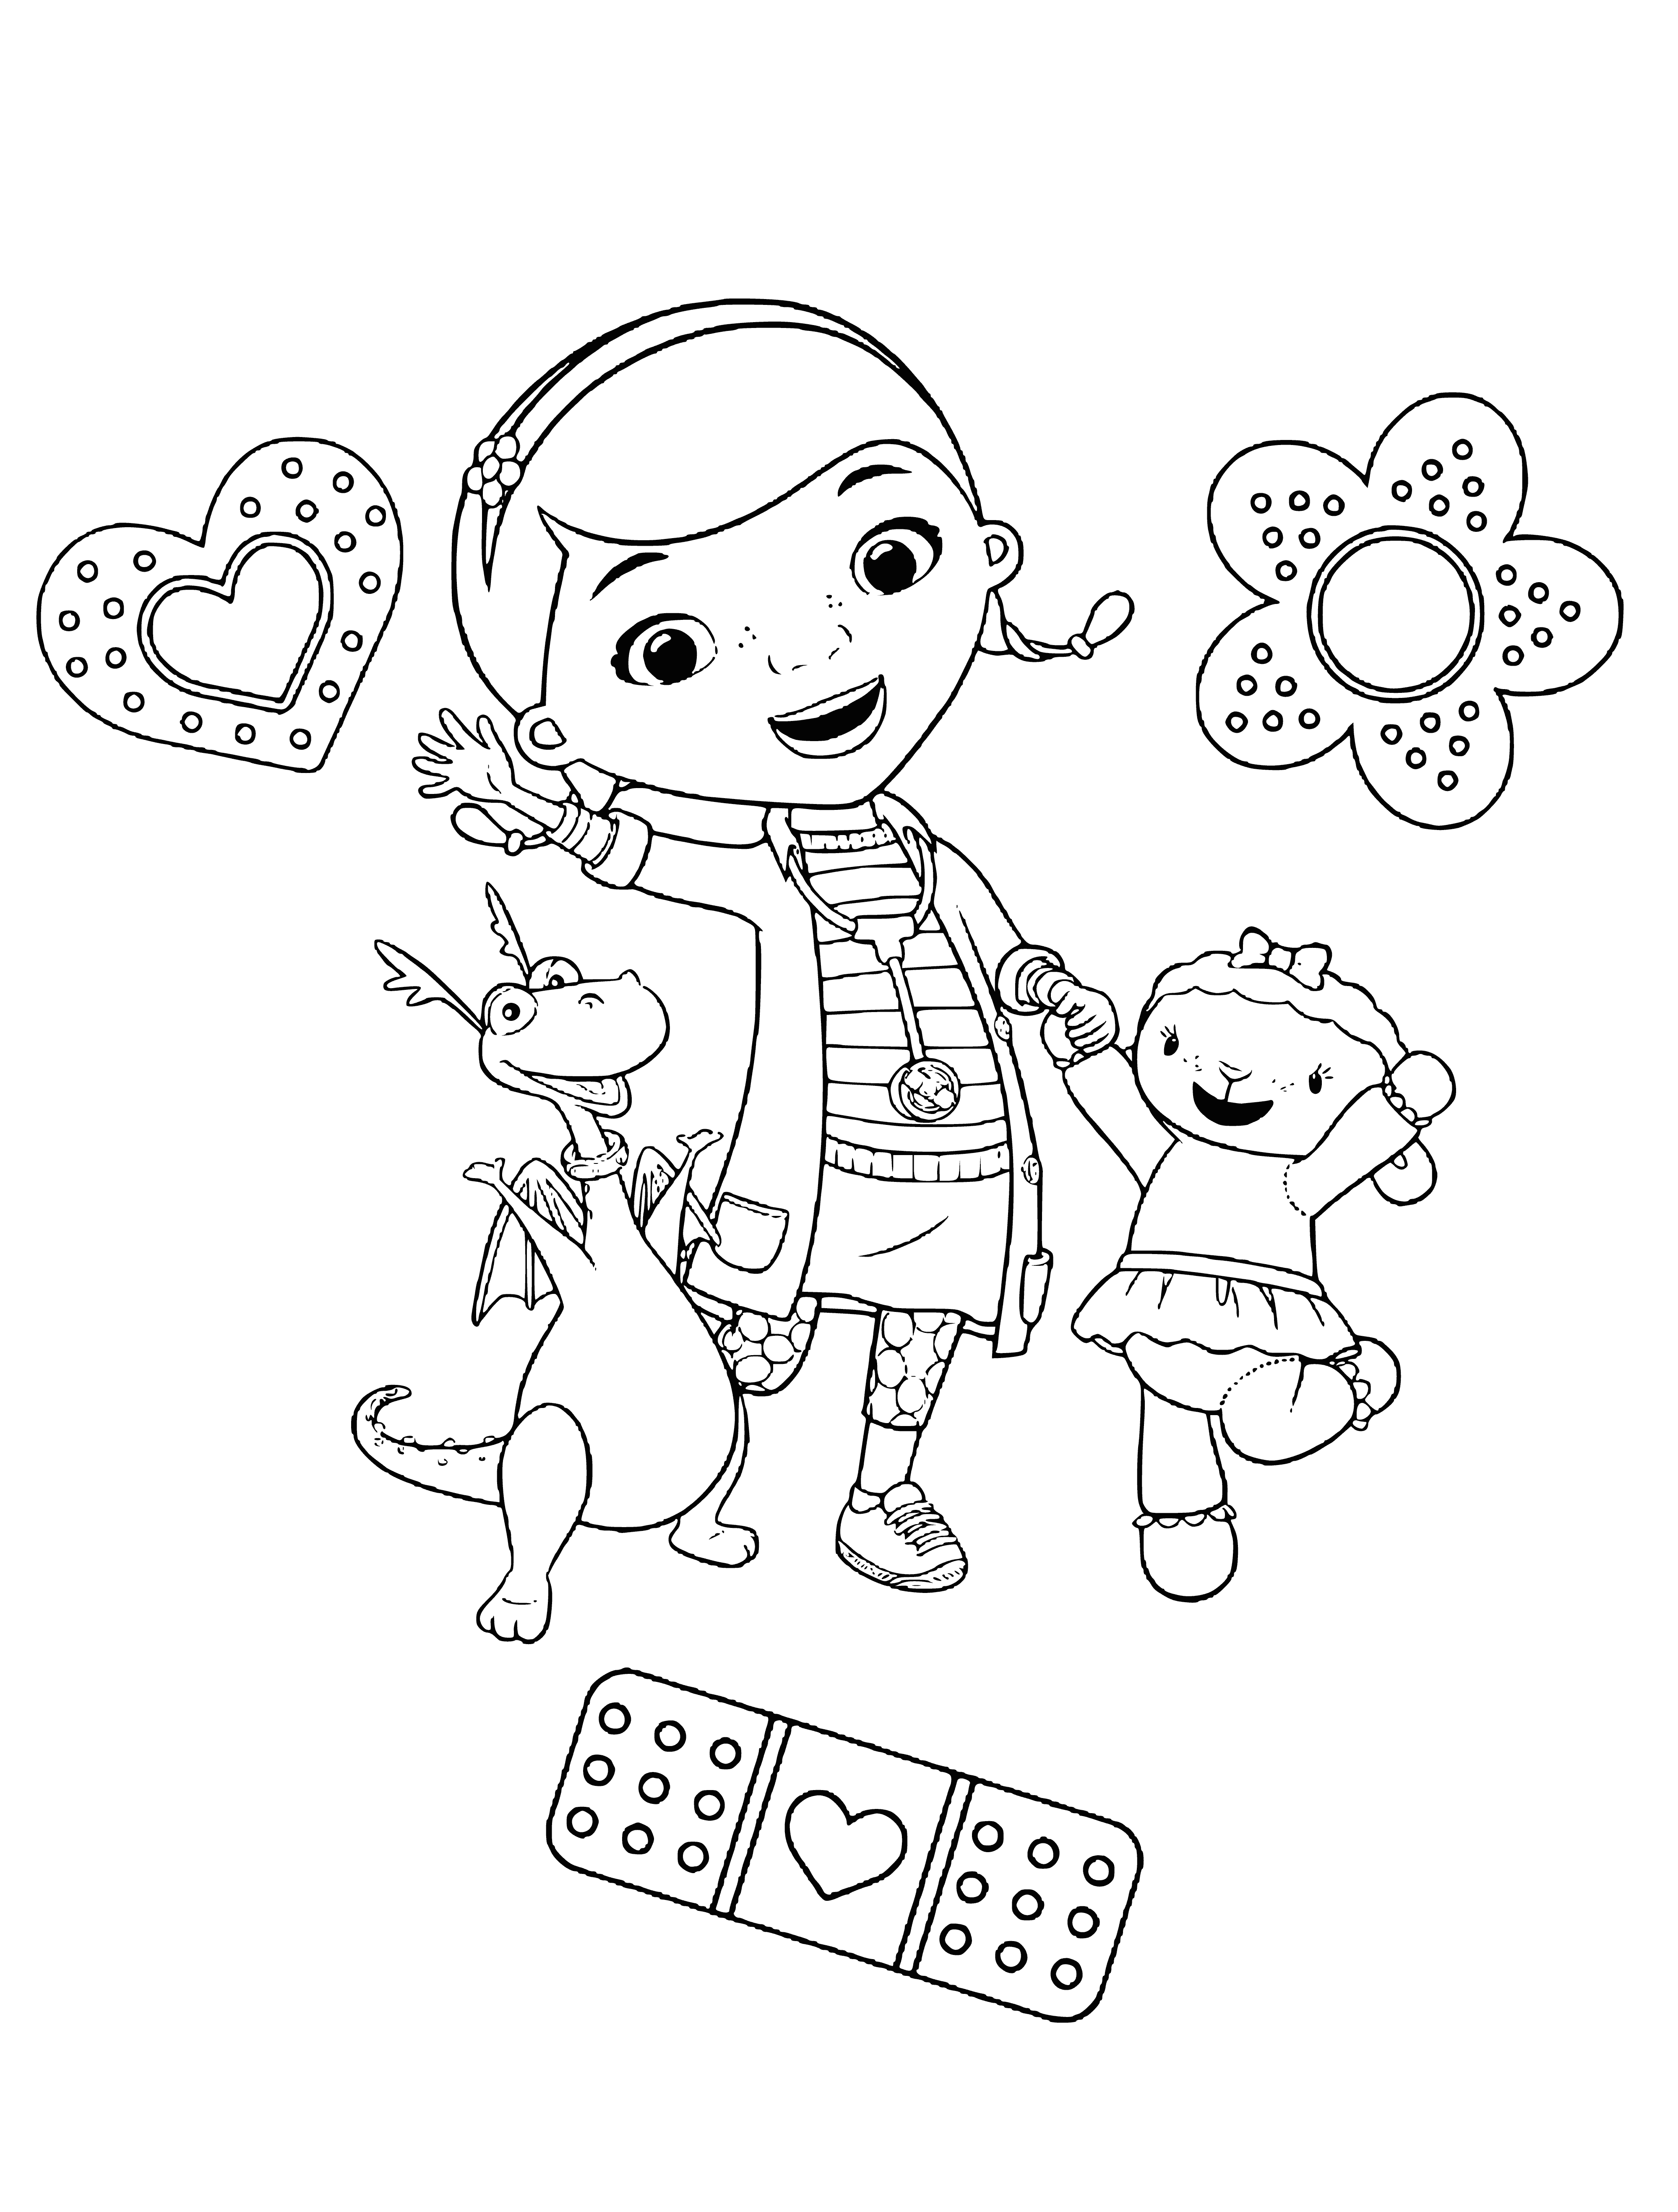 Dotty with friends coloring page